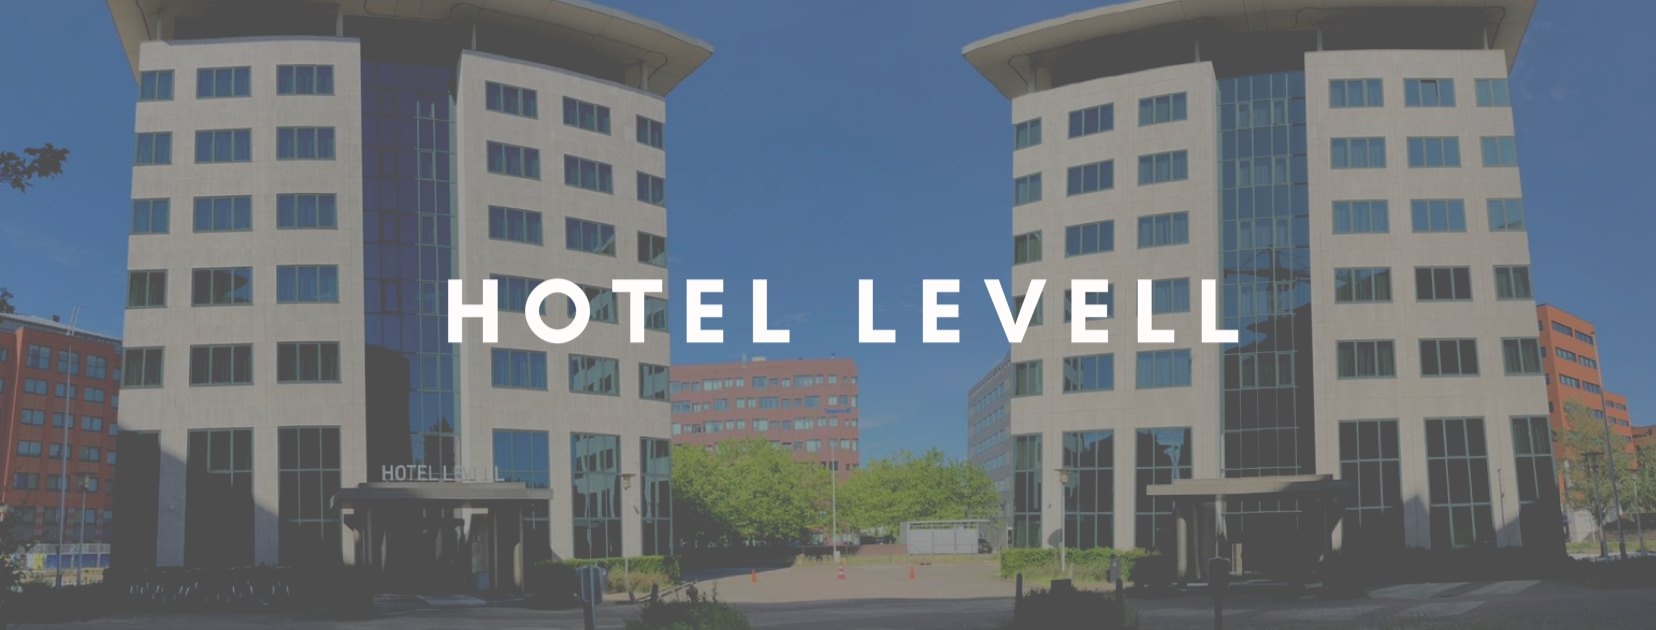 Hotel Levell